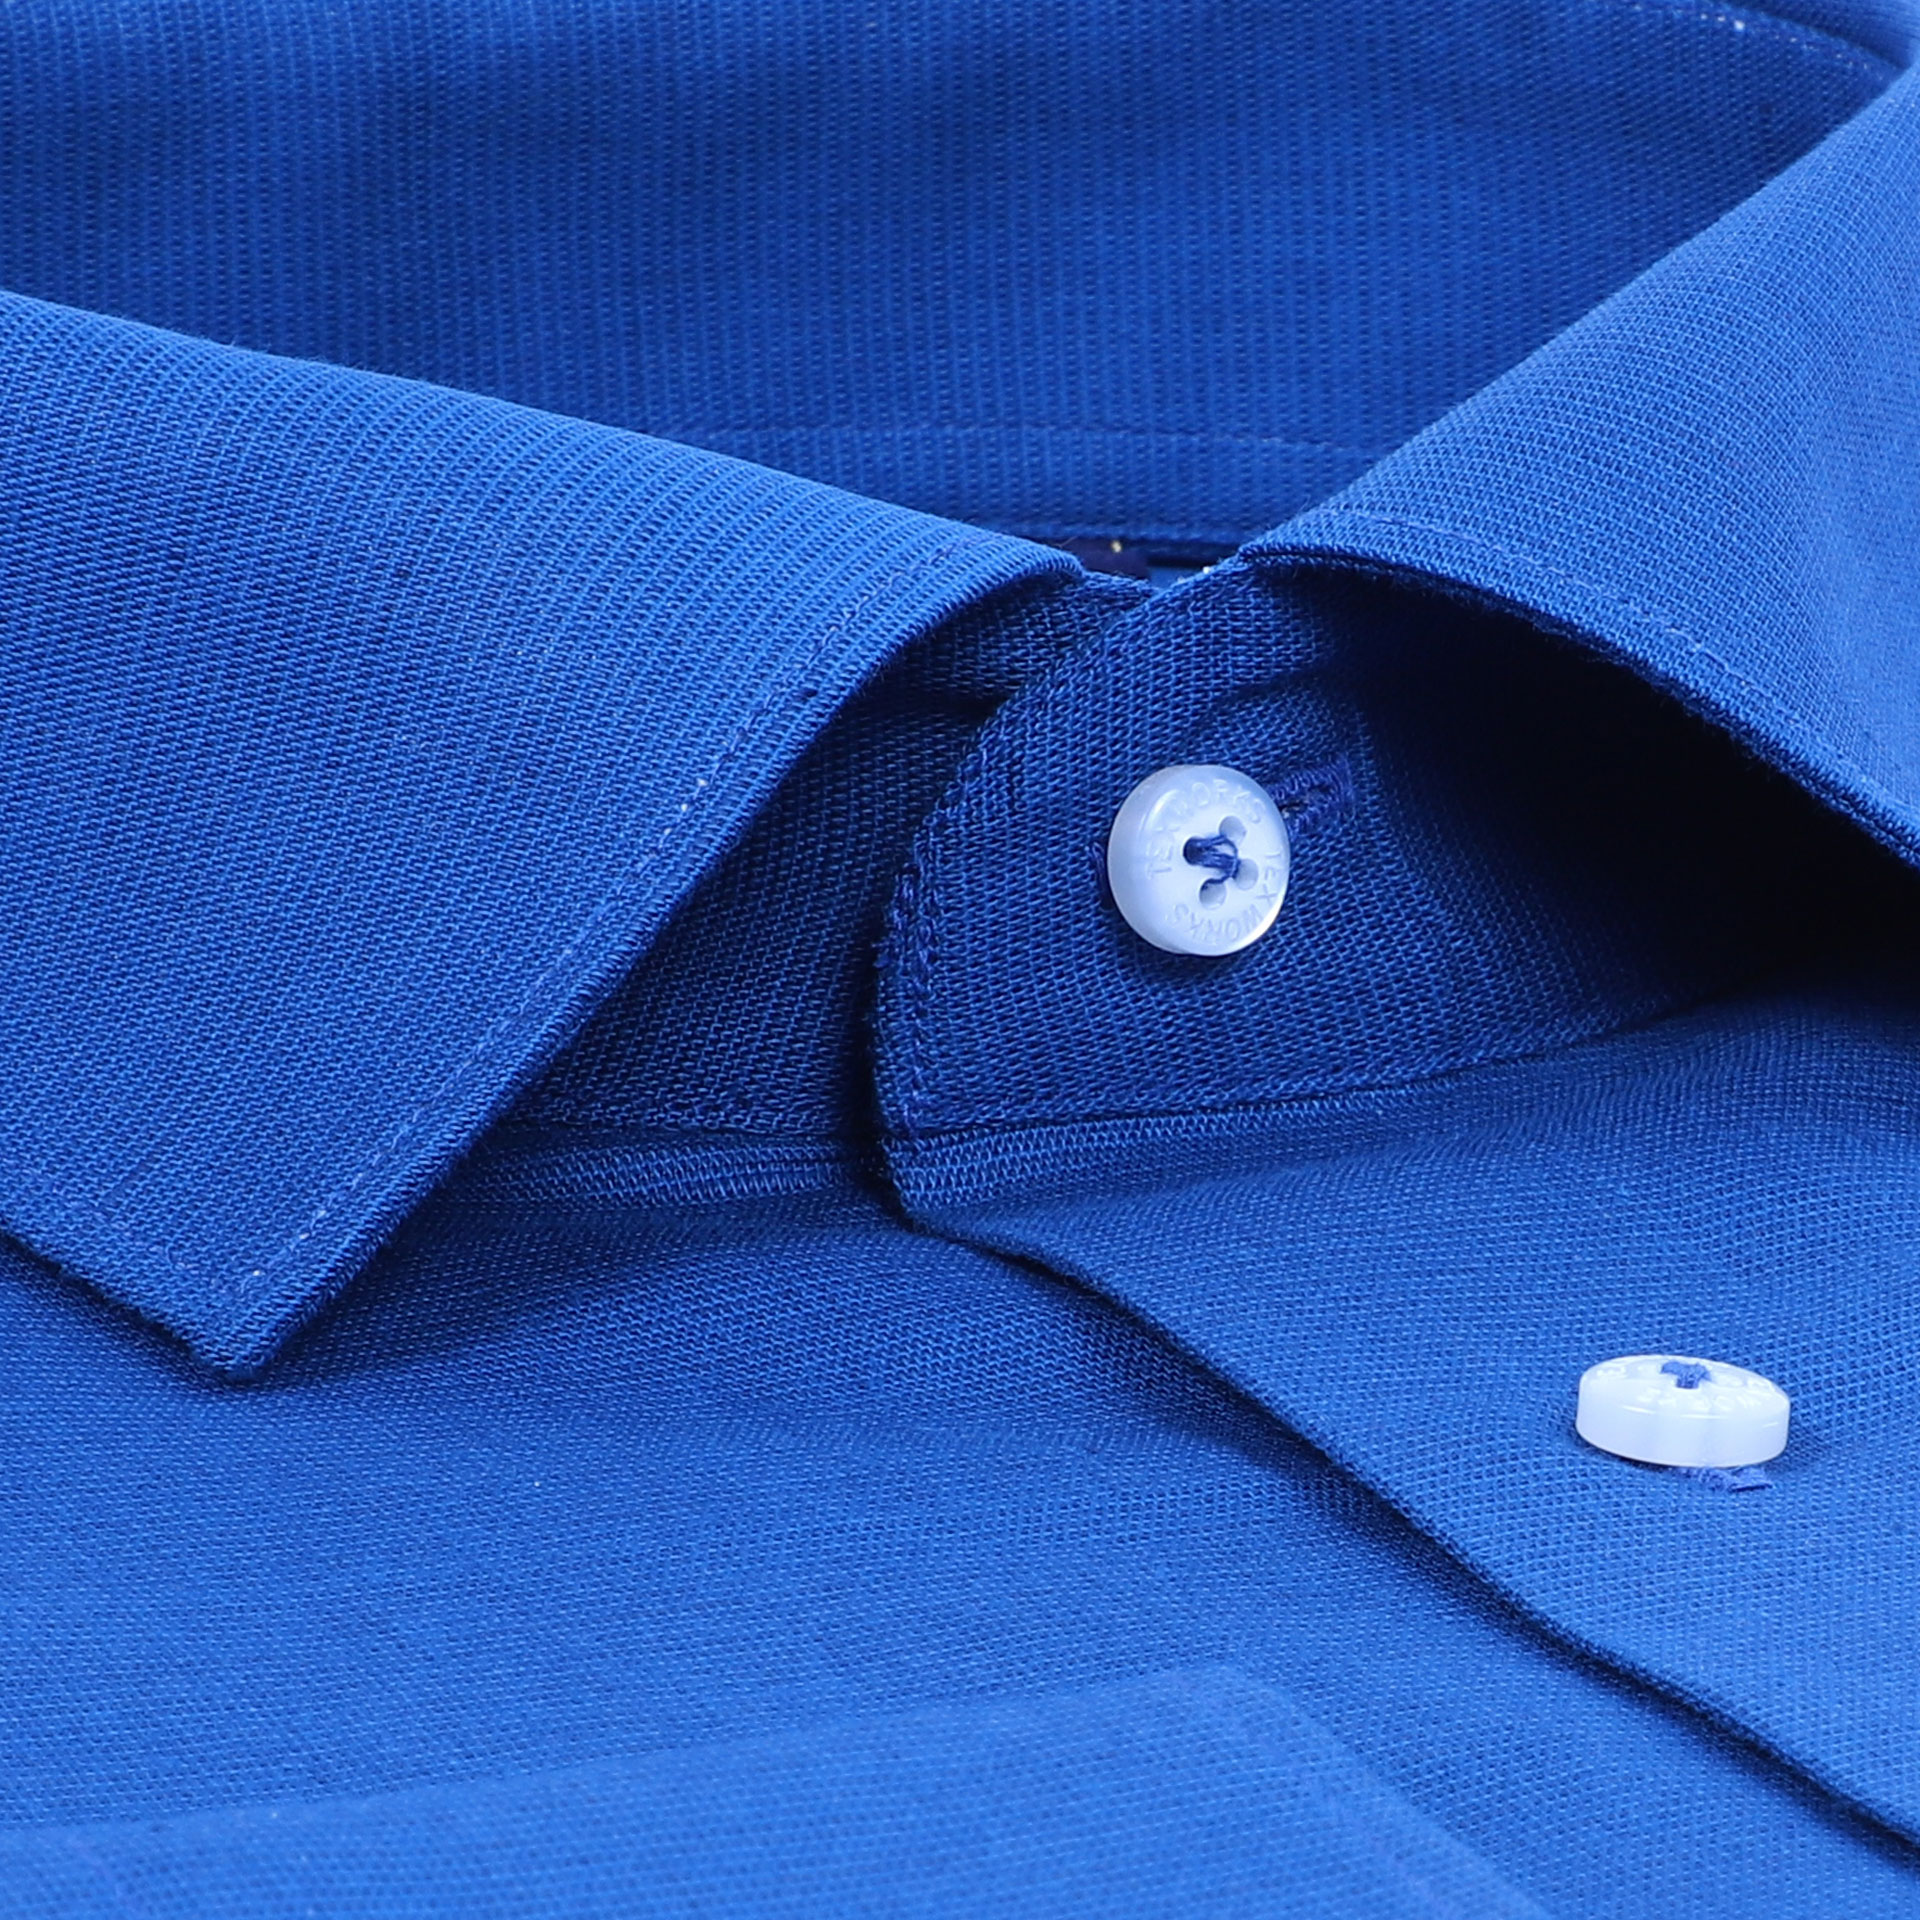 Blue Cotton Linen Solid Poplin Plain Shirts with High-Quality Fabric Online